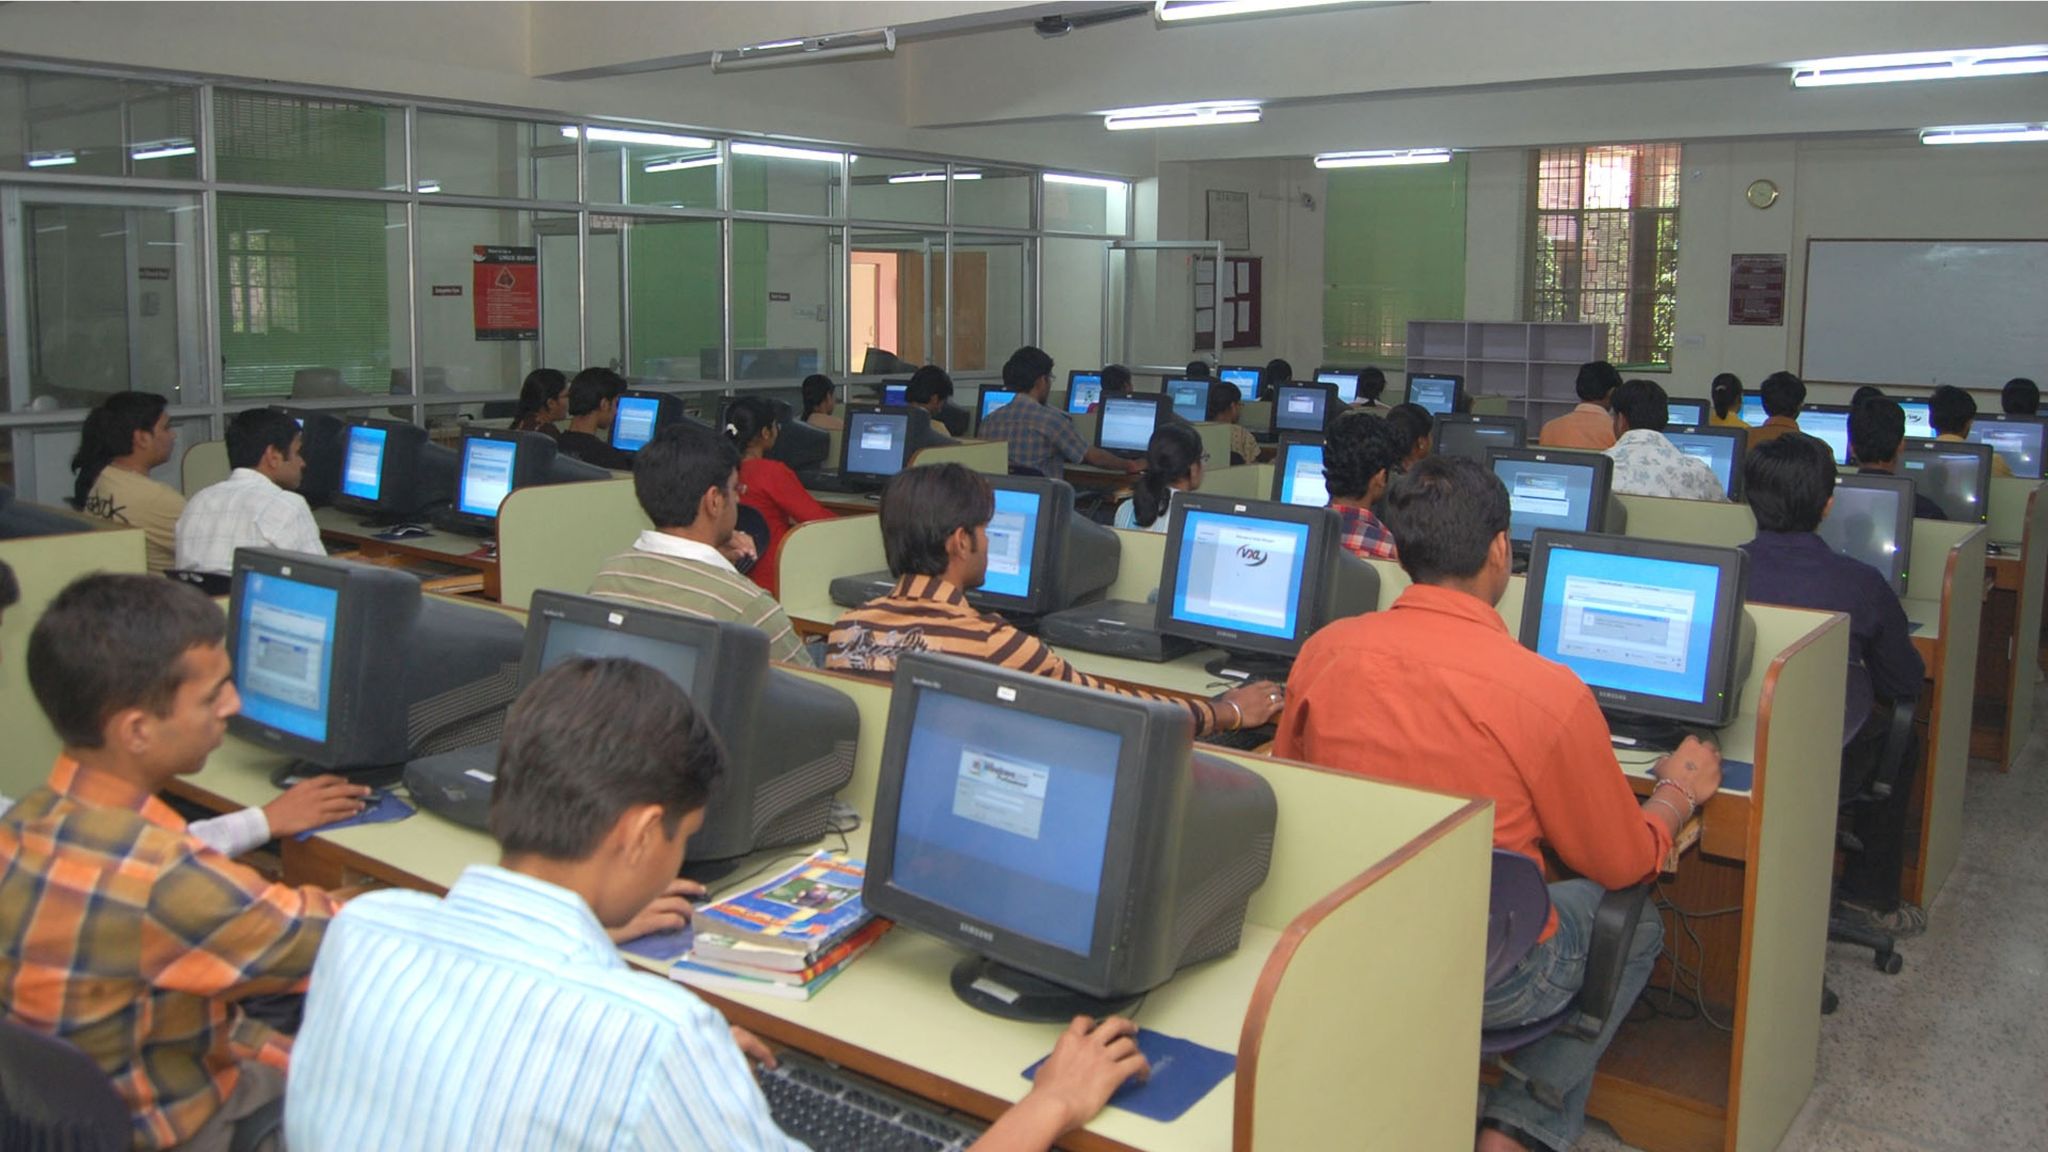 A picture of an old computer lab, like the one in my university in the early 1990s.